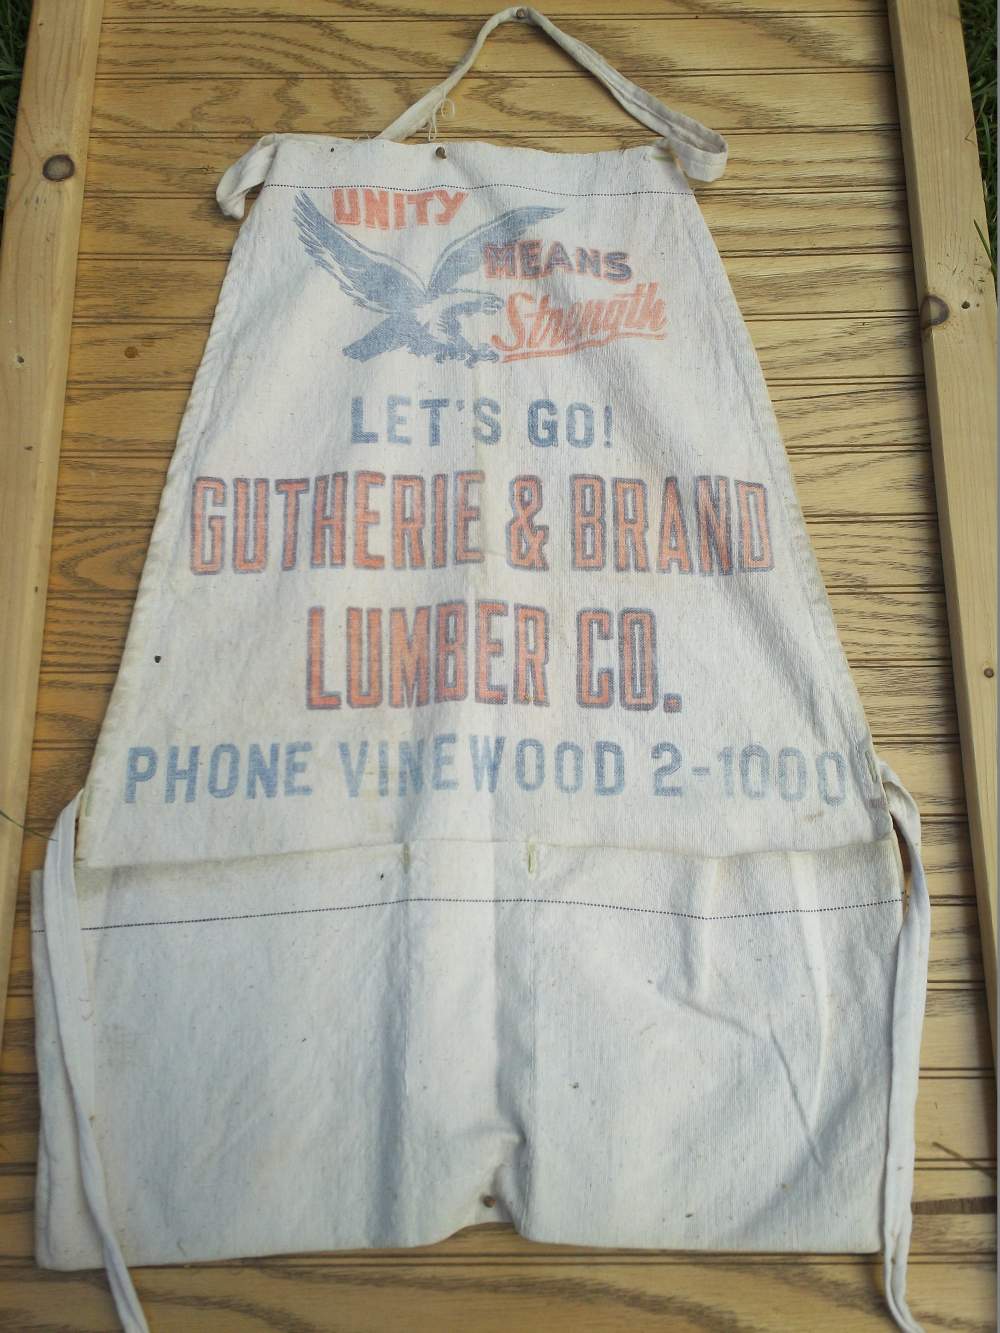 Name:  GLC Gutherie and Brand Lumber.jpg
Views: 822
Size:  142.7 KB